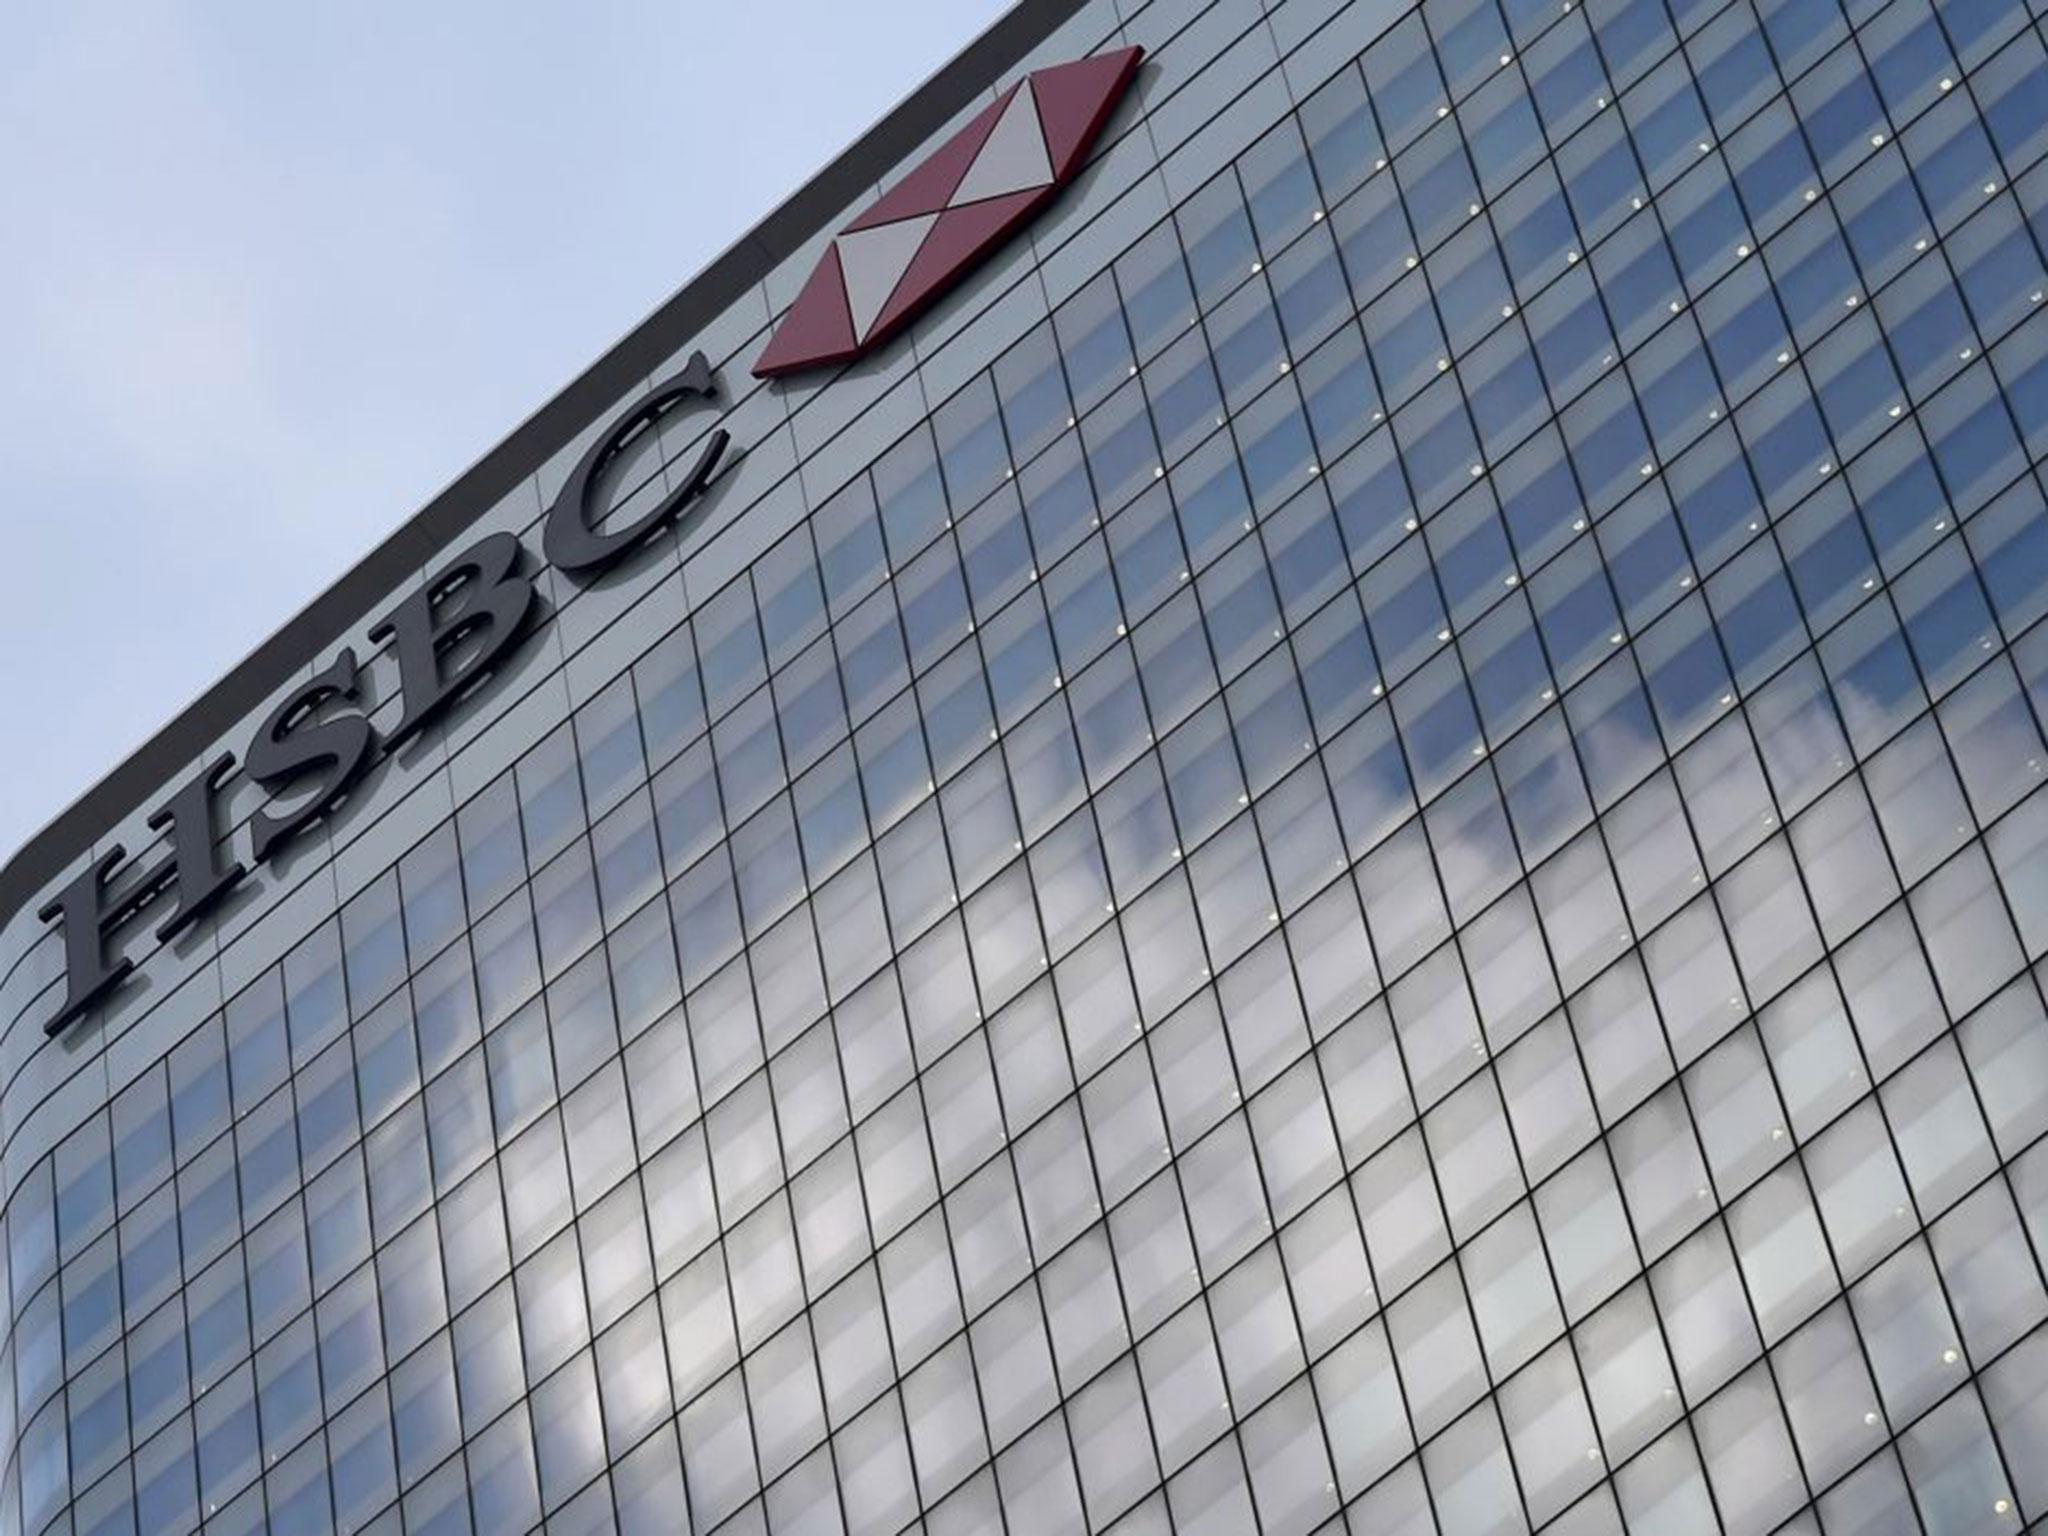 HSBC had previously said it could switch up to 1,000 jobs to Paris if Britain voted to exit the EU